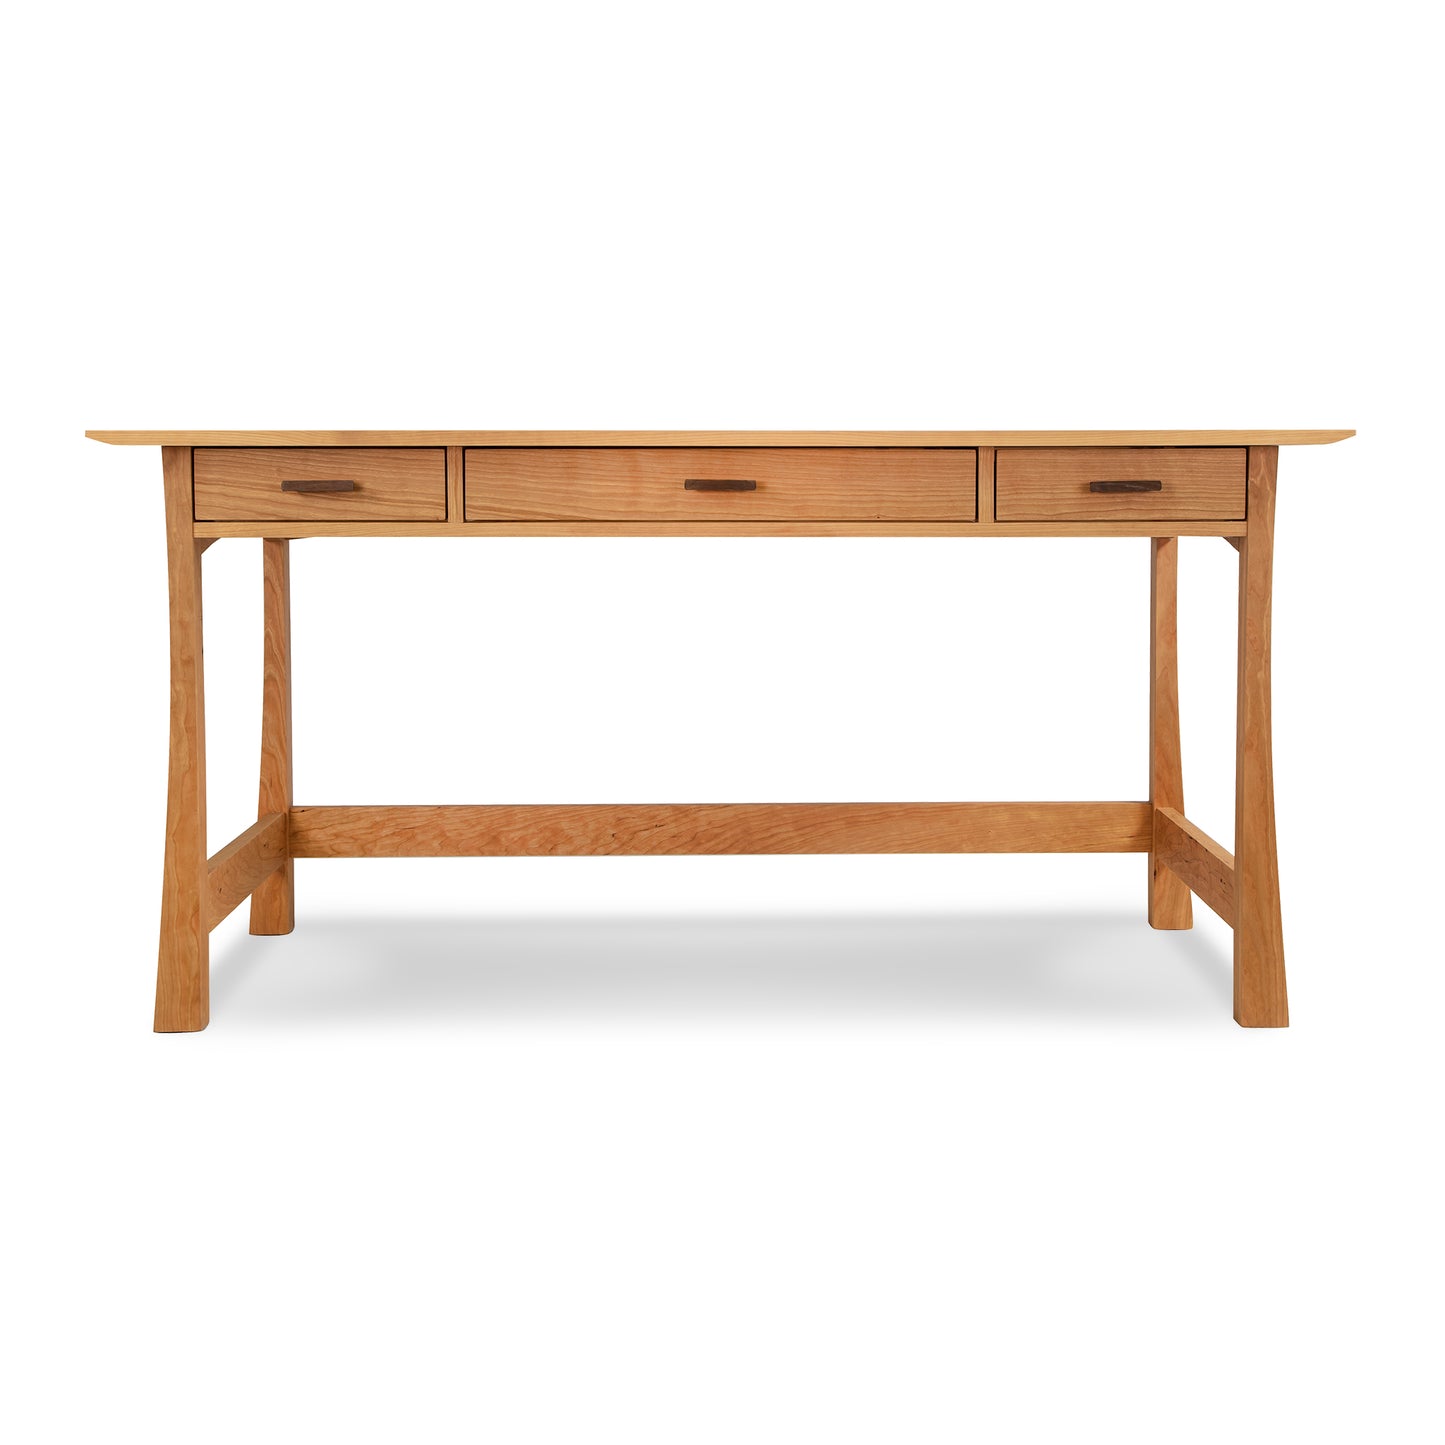 A Vermont Furniture Designs Contemporary Craftsman Library Desk with two drawers.